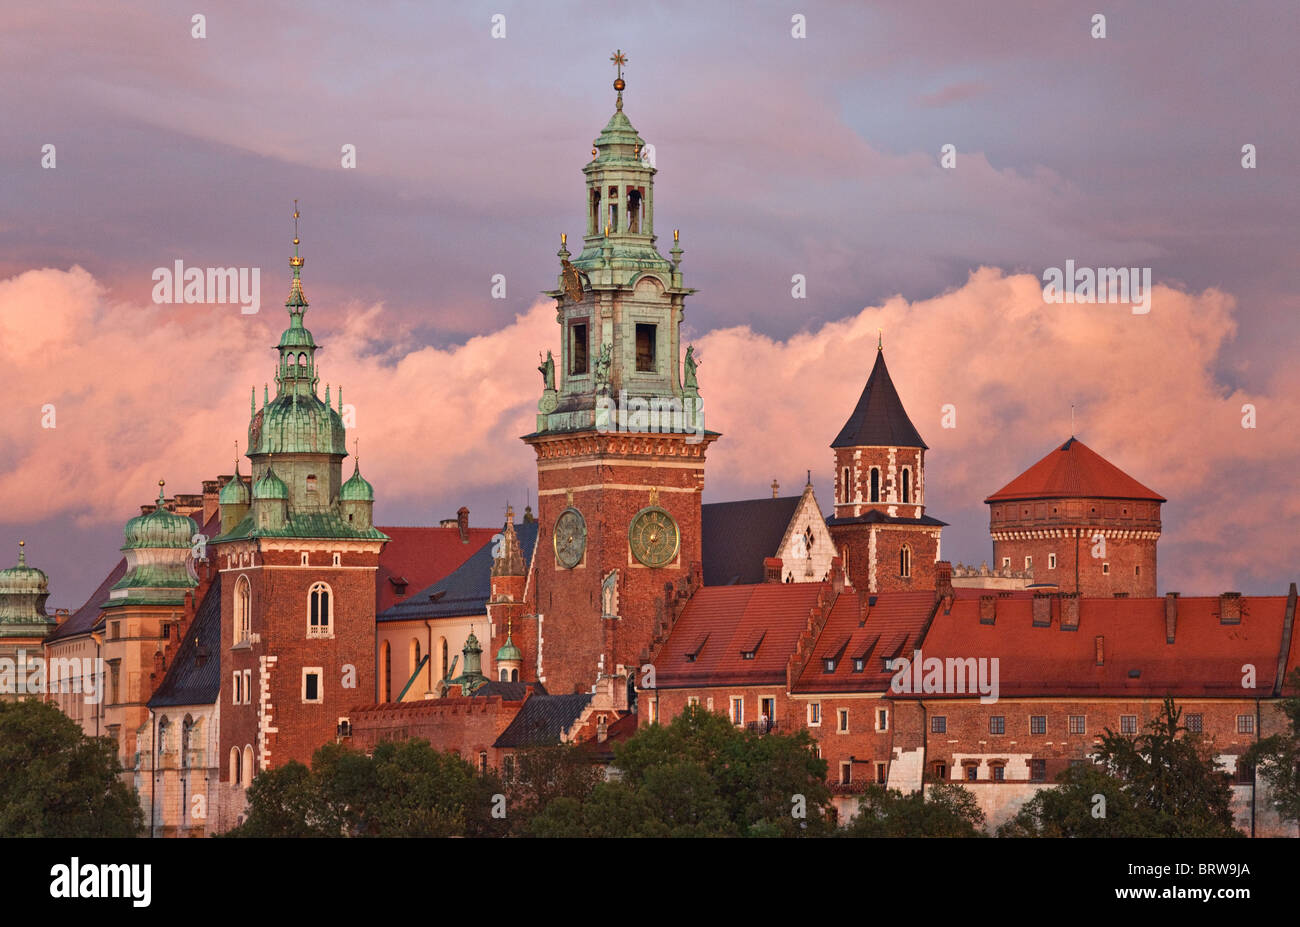 Wawel castle in Cracow, Poland Stock Photo